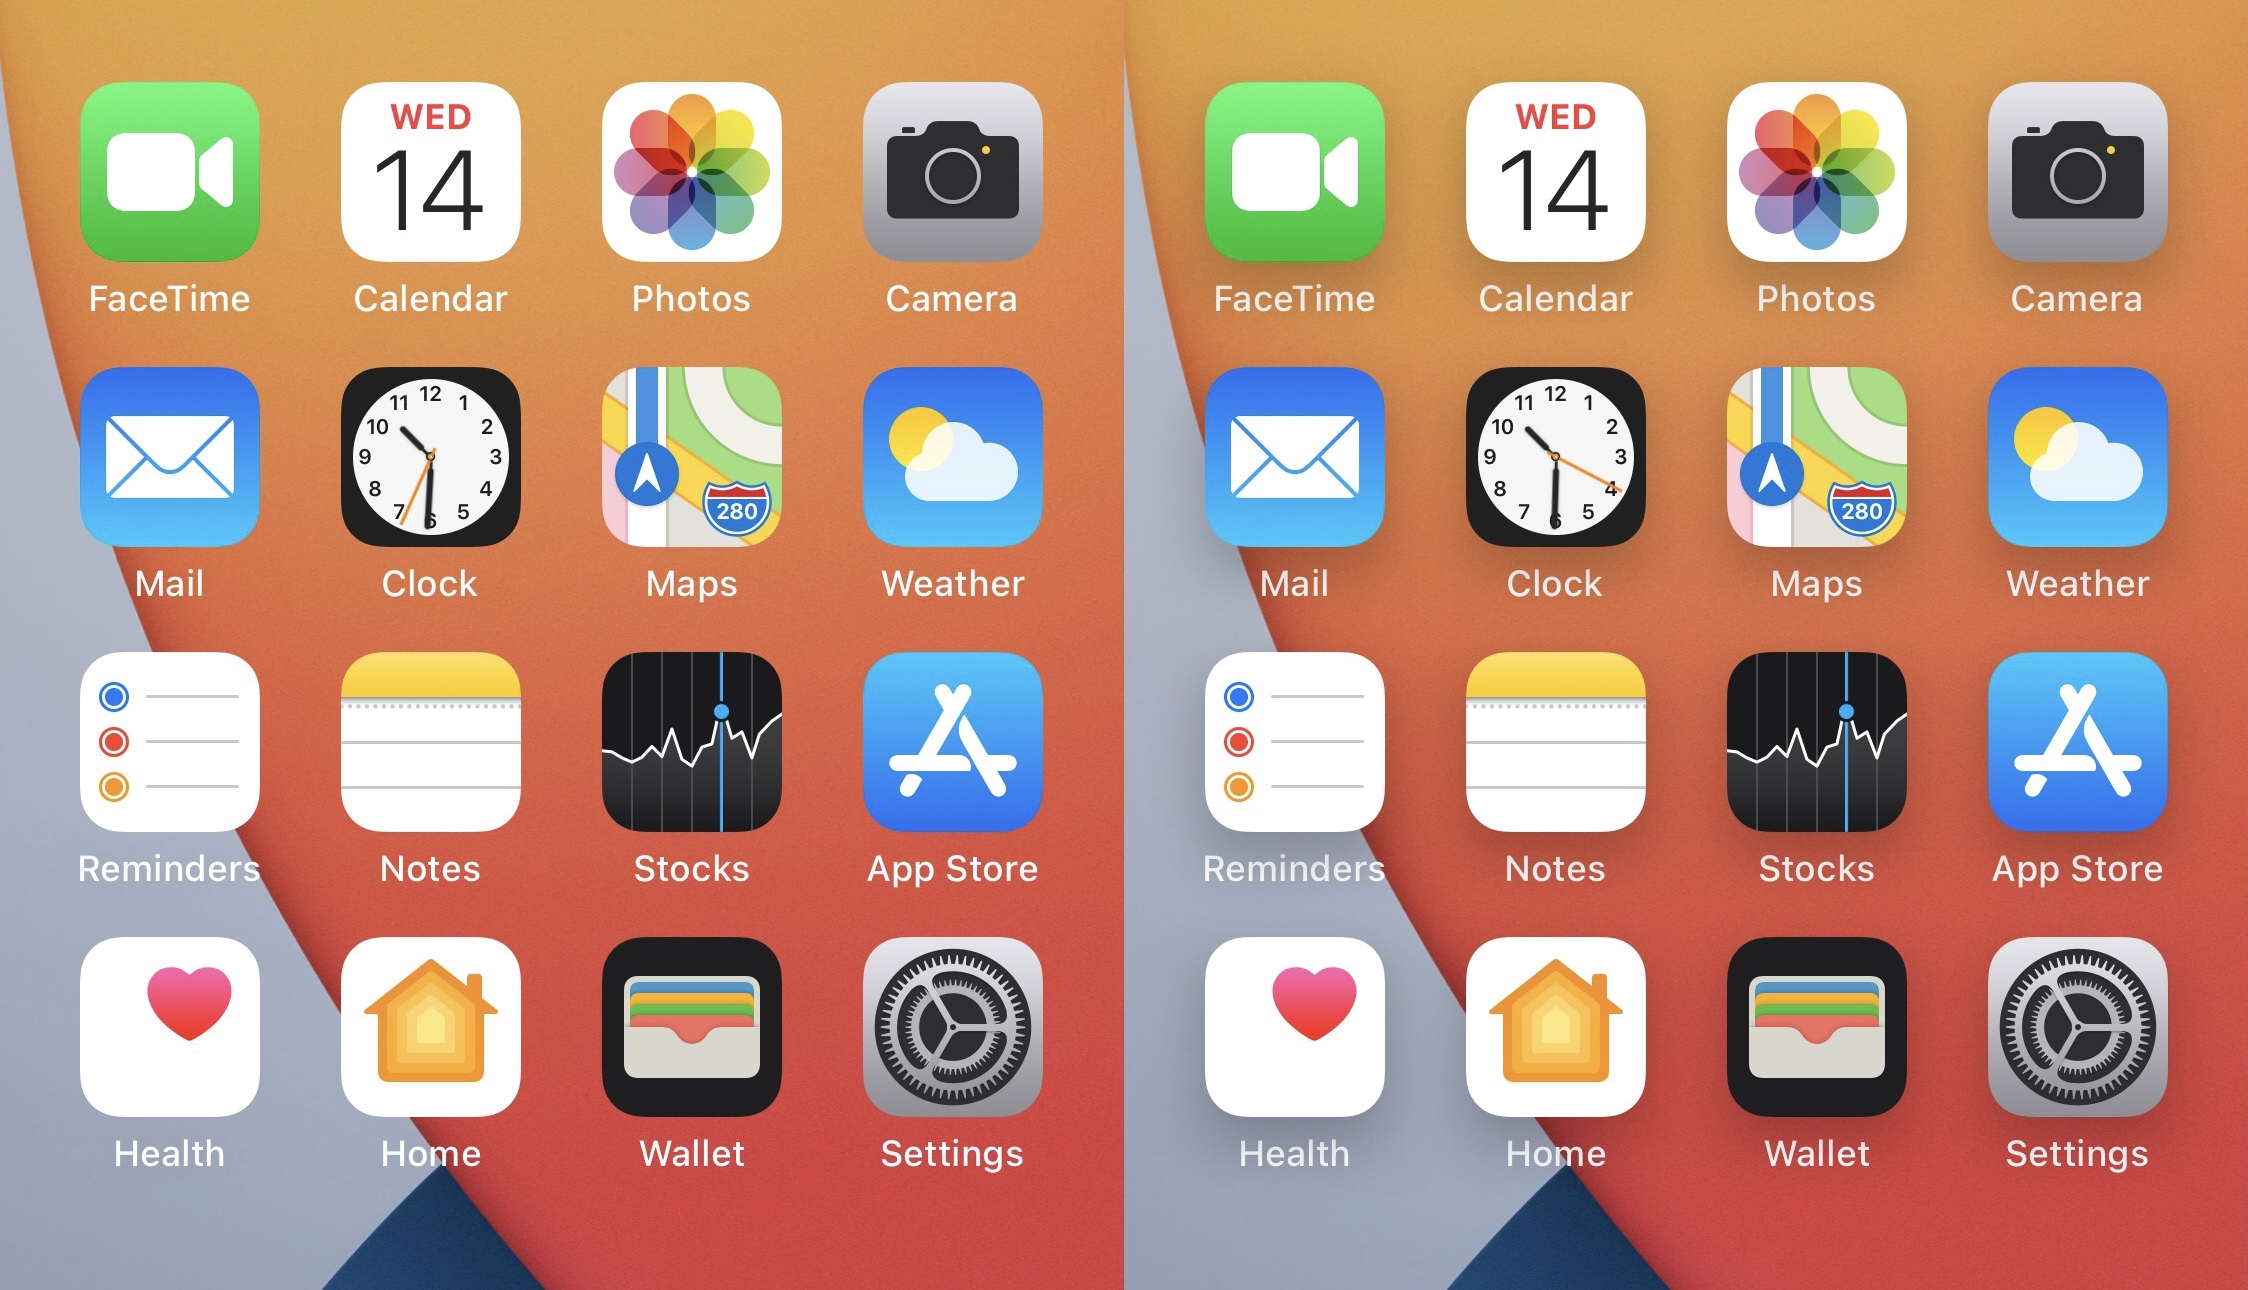 Add shadows to your iPhone’s Home Screen app icons.